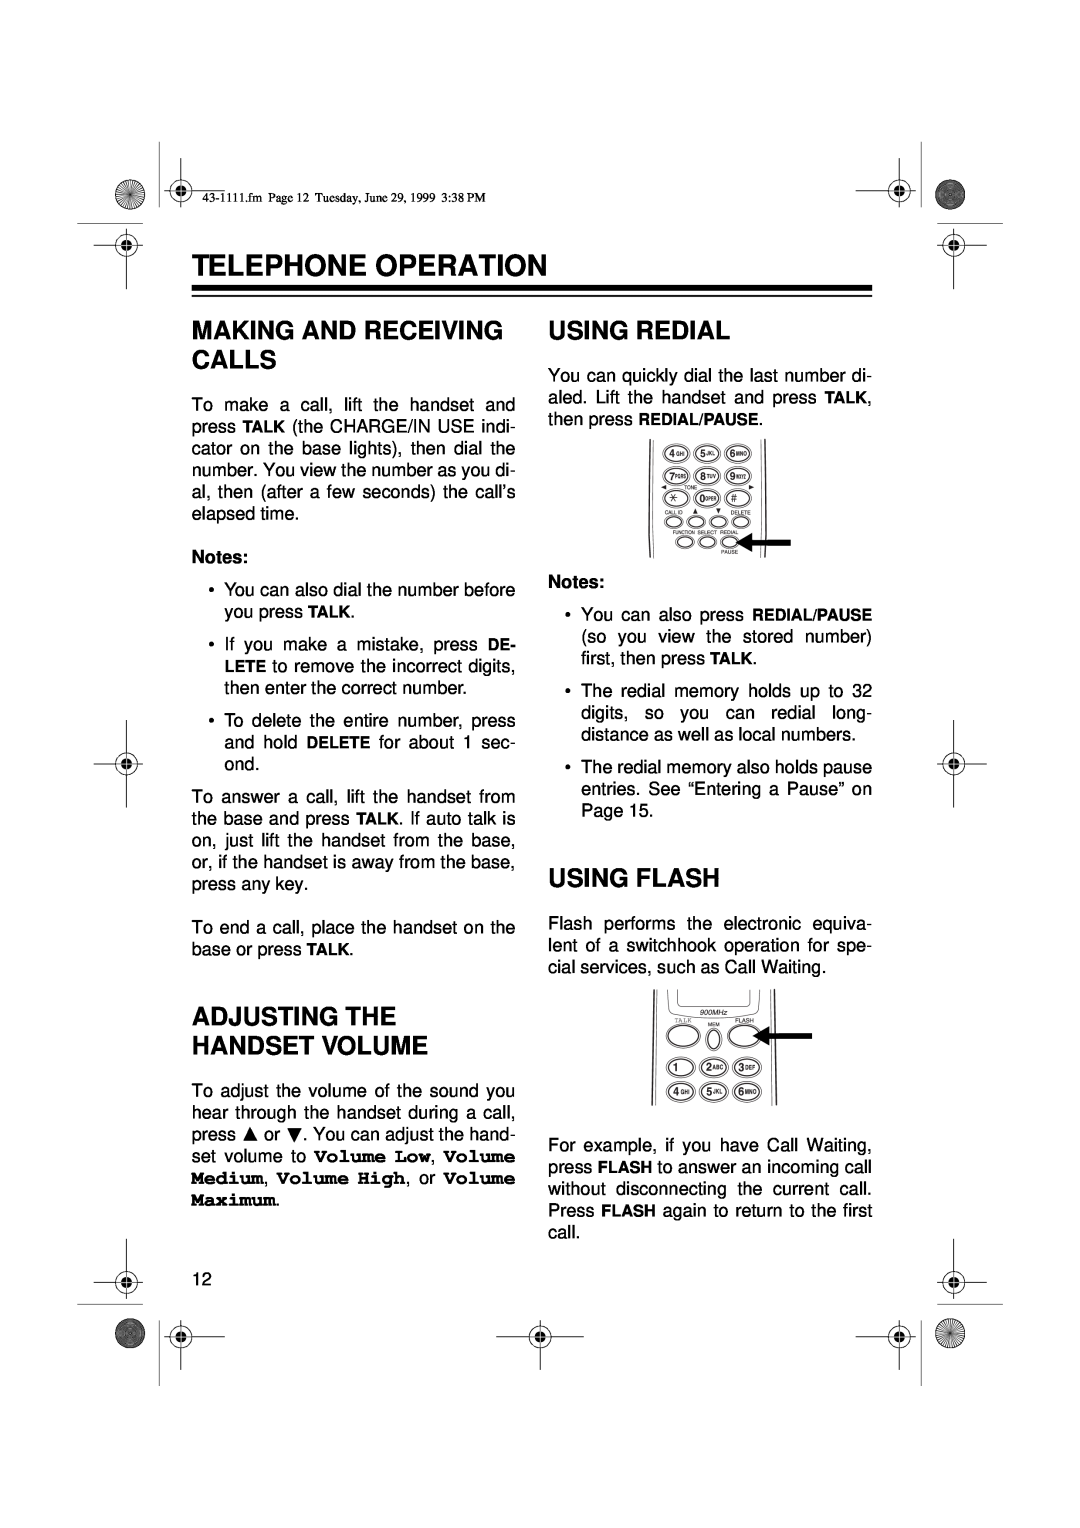 Radio Shack ET-1111 owner manual Telephone Operation, Making And Receiving Calls, Using Redial, Using Flash 